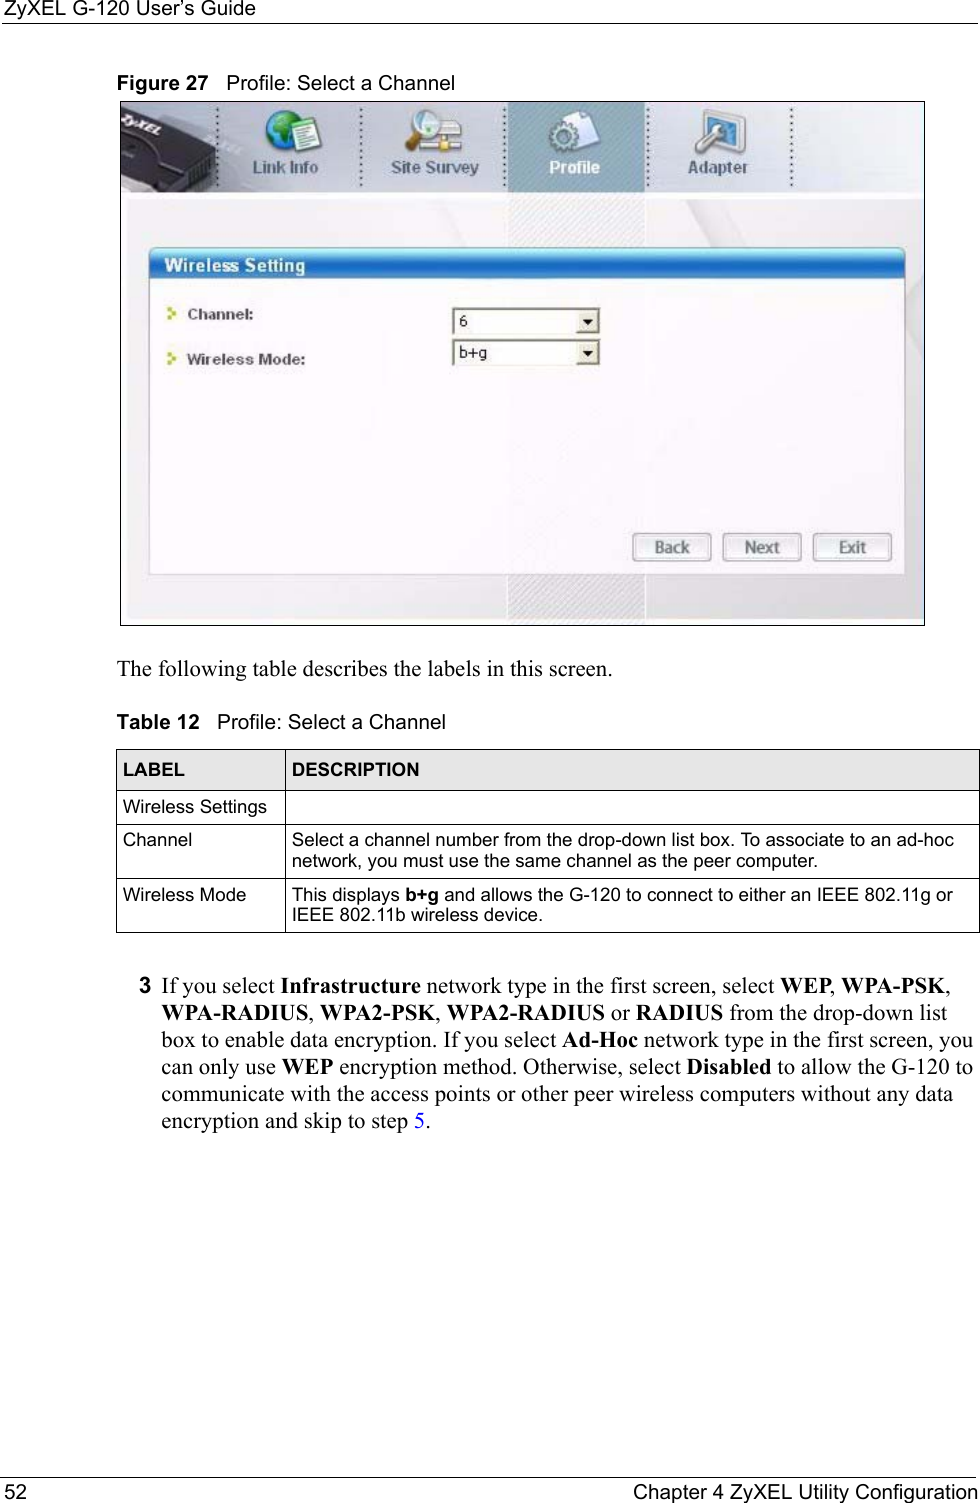 ZyXEL G-120 User’s Guide52 Chapter 4 ZyXEL Utility ConfigurationFigure 27   Profile: Select a Channel The following table describes the labels in this screen. 3If you select Infrastructure network type in the first screen, select WEP, WPA-PSK, WPA-RADIUS, WPA2-PSK, WPA2-RADIUS or RADIUS from the drop-down list box to enable data encryption. If you select Ad-Hoc network type in the first screen, you can only use WEP encryption method. Otherwise, select Disabled to allow the G-120 to communicate with the access points or other peer wireless computers without any data encryption and skip to step 5.Table 12   Profile: Select a Channel LABEL DESCRIPTIONWireless SettingsChannel Select a channel number from the drop-down list box. To associate to an ad-hoc network, you must use the same channel as the peer computer.Wireless Mode This displays b+g and allows the G-120 to connect to either an IEEE 802.11g or IEEE 802.11b wireless device.